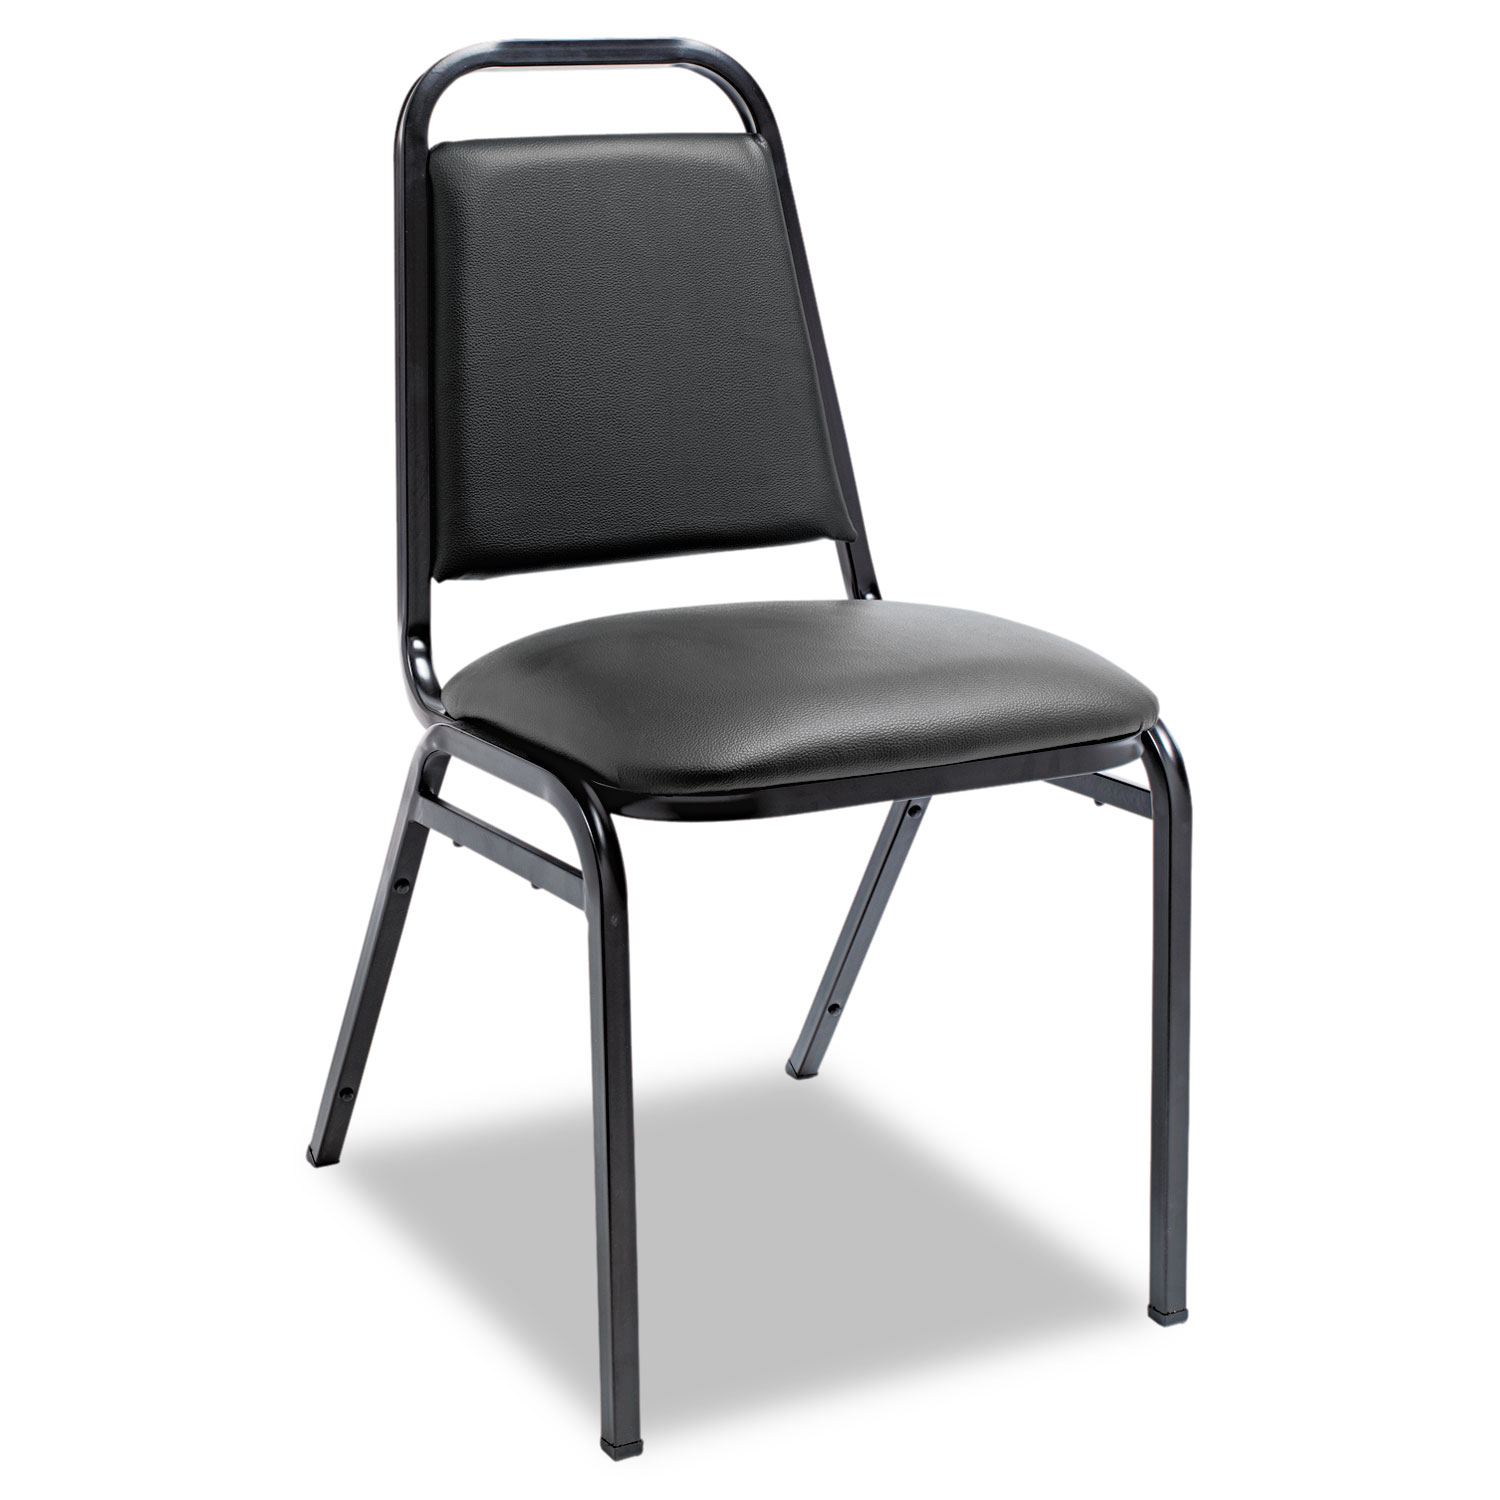  Alera ALESC68VY10B Padded Steel Stacking Chair, Black Seat/Black Back, Black Base, 4/Carton (ALESC68VY10B) 